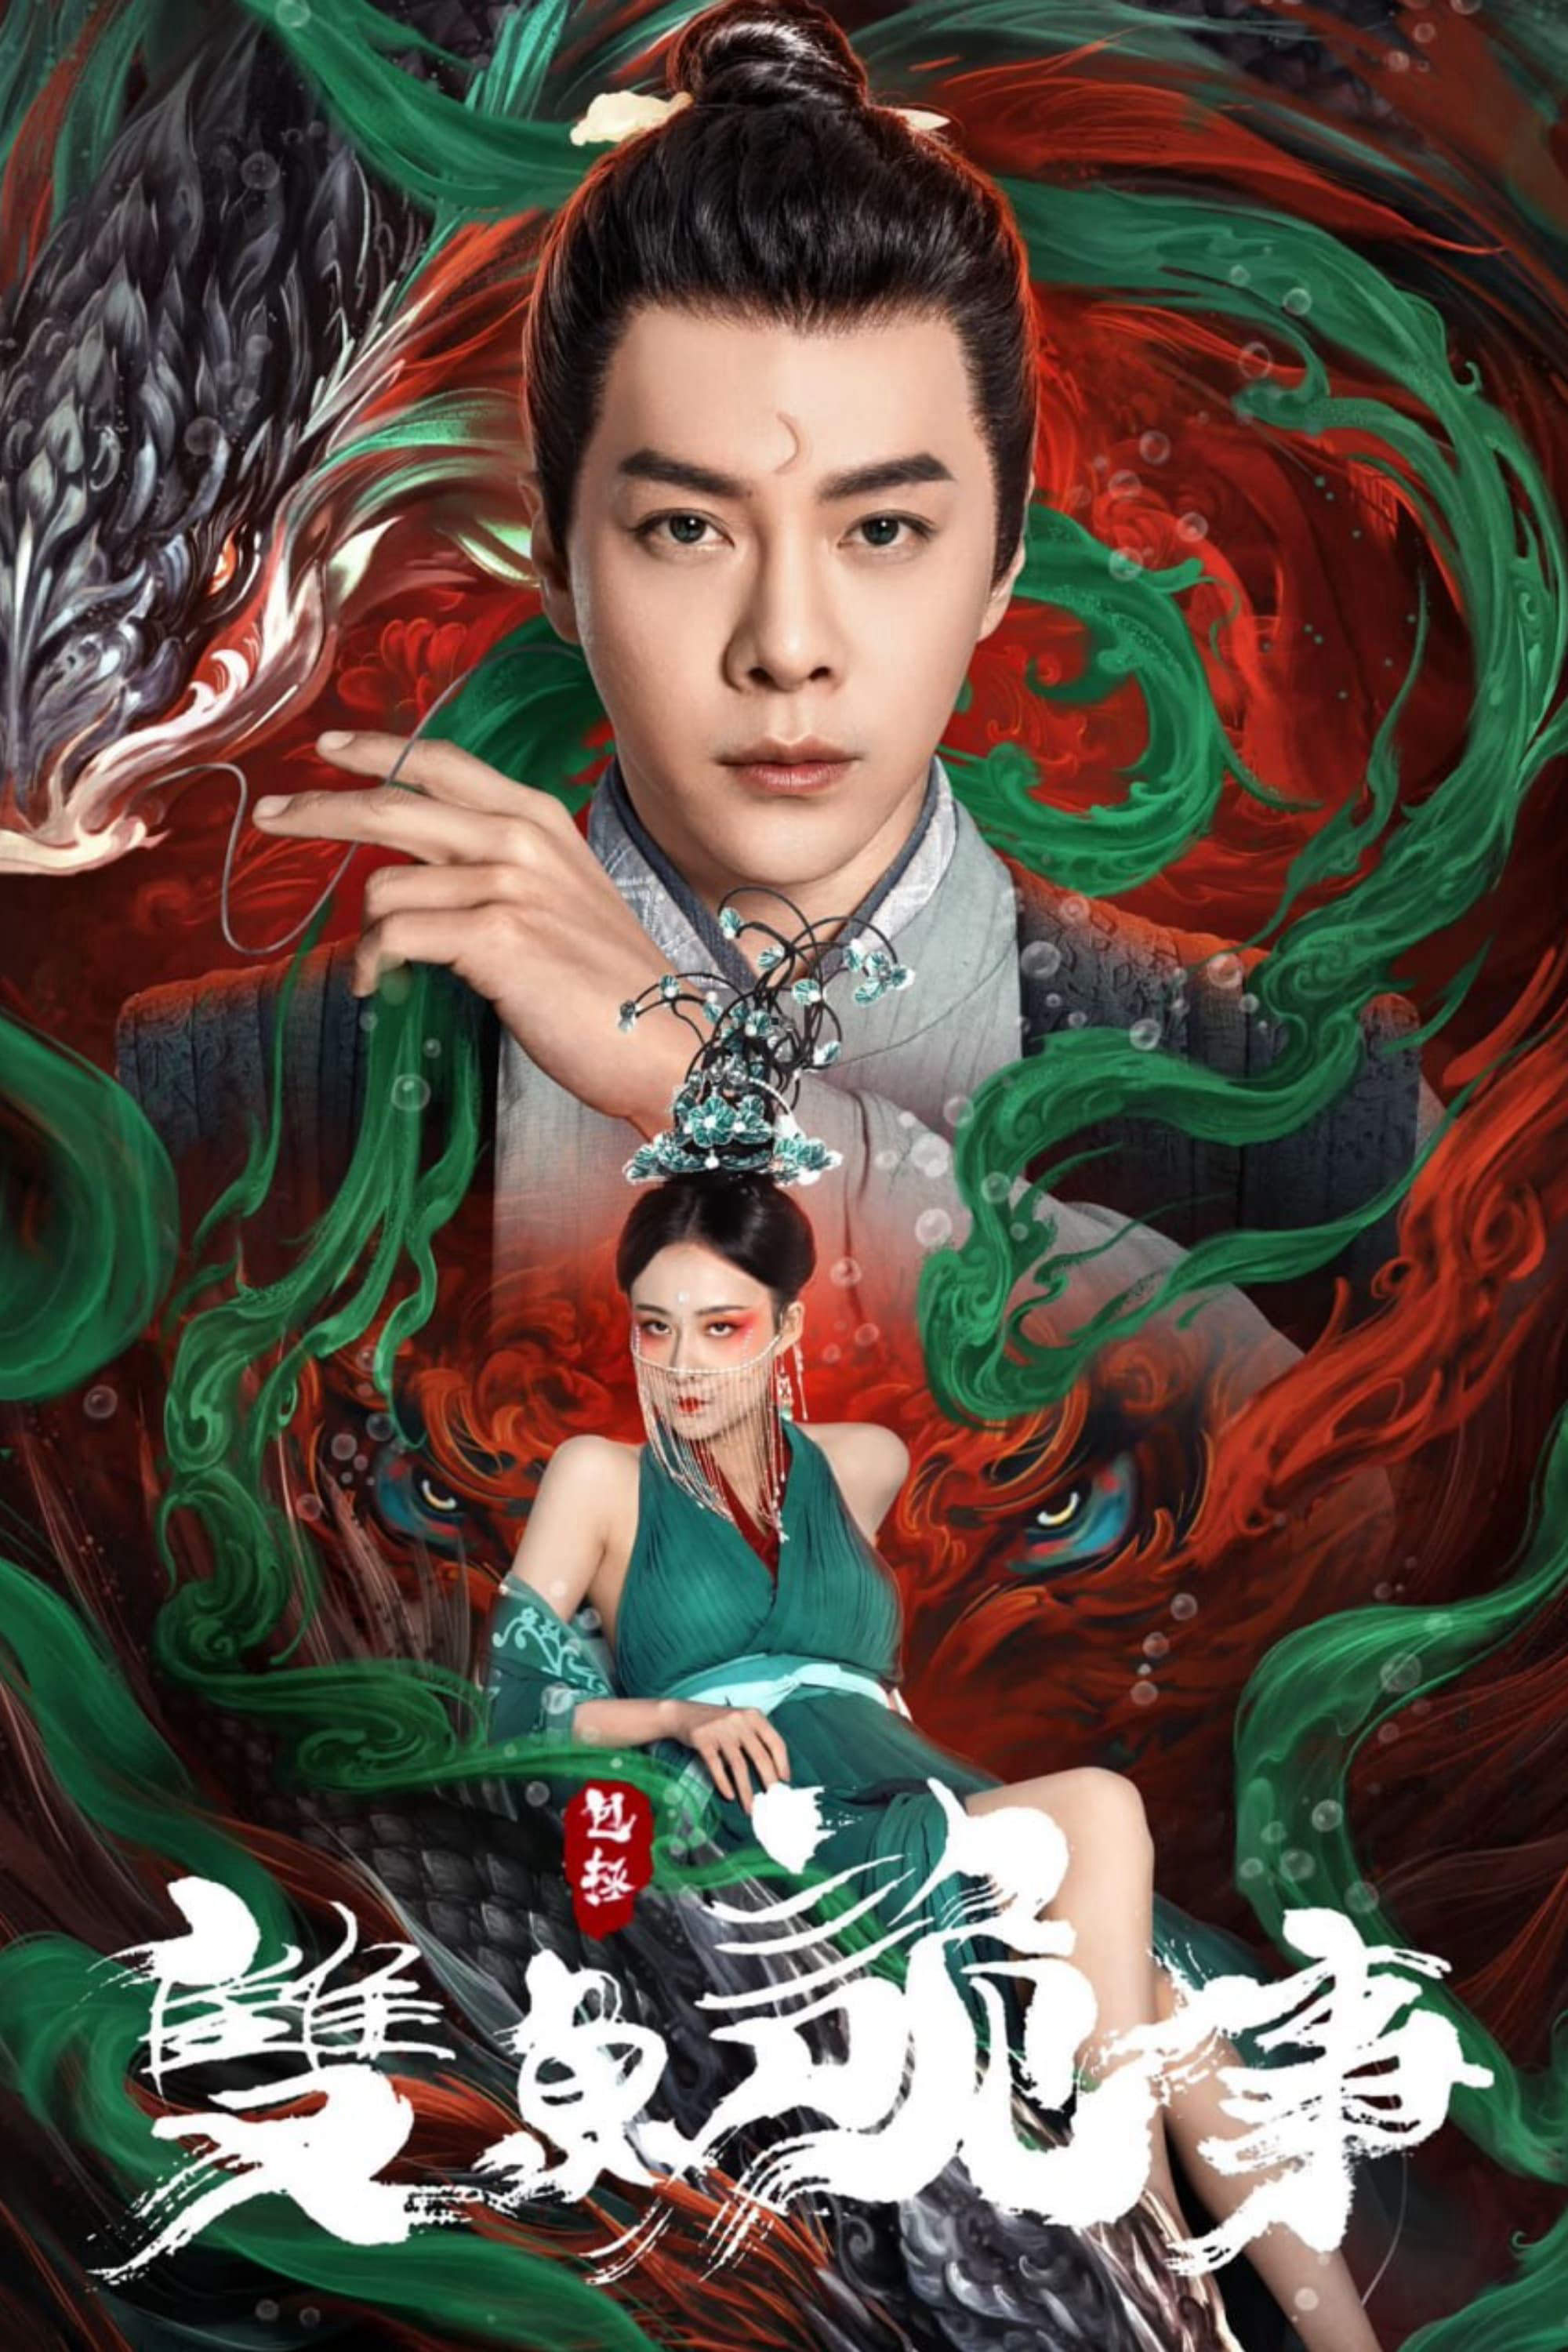 Poster Phim Bao Chửng: Song Ngư Quỷ Sự (The Mystery of Jade)